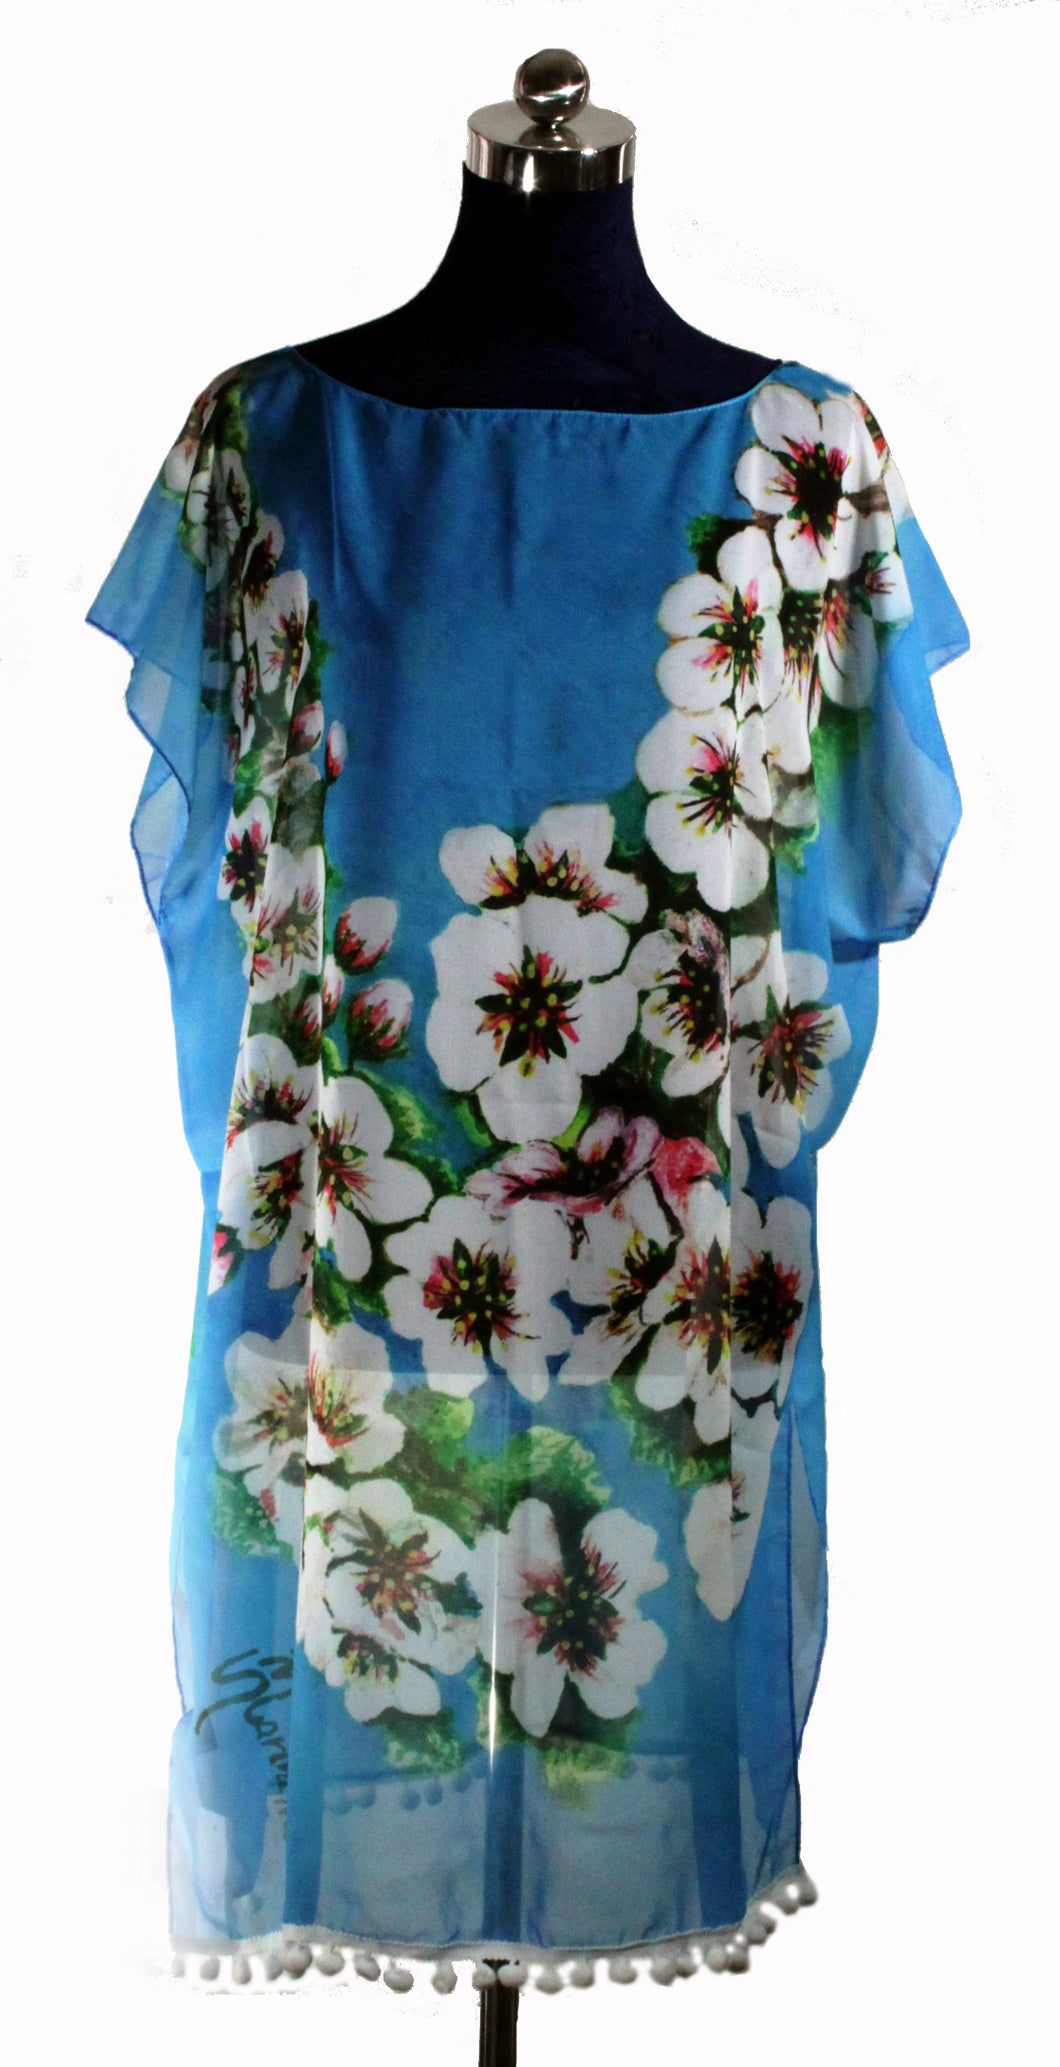 KAFTAN FOR WOMEN WITH ALMOND'S FLOWER IN SILK CHIFFON WITH ARTISTIC PRINTS THAT COME FROM PAINTINGS.